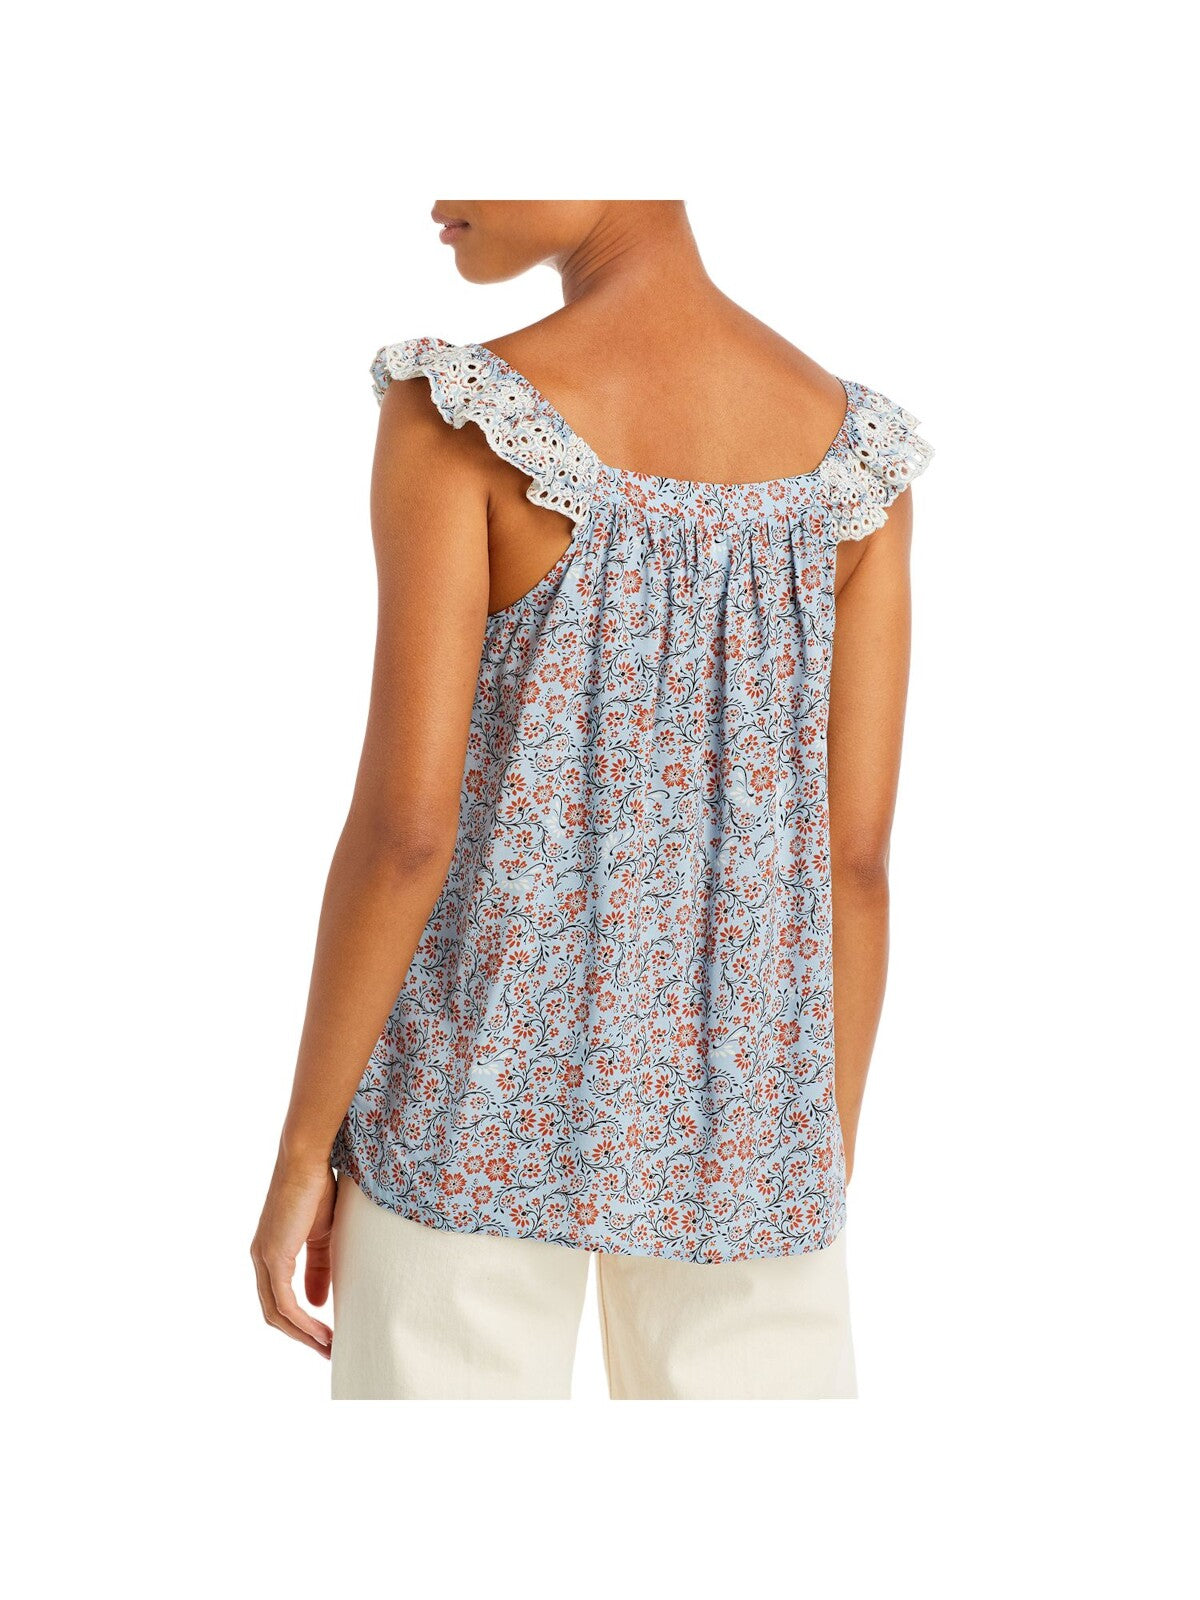 FEVER Womens Blue Embroidered Ruffled Pleated Floral Sleeveless Square Neck Tank Top L